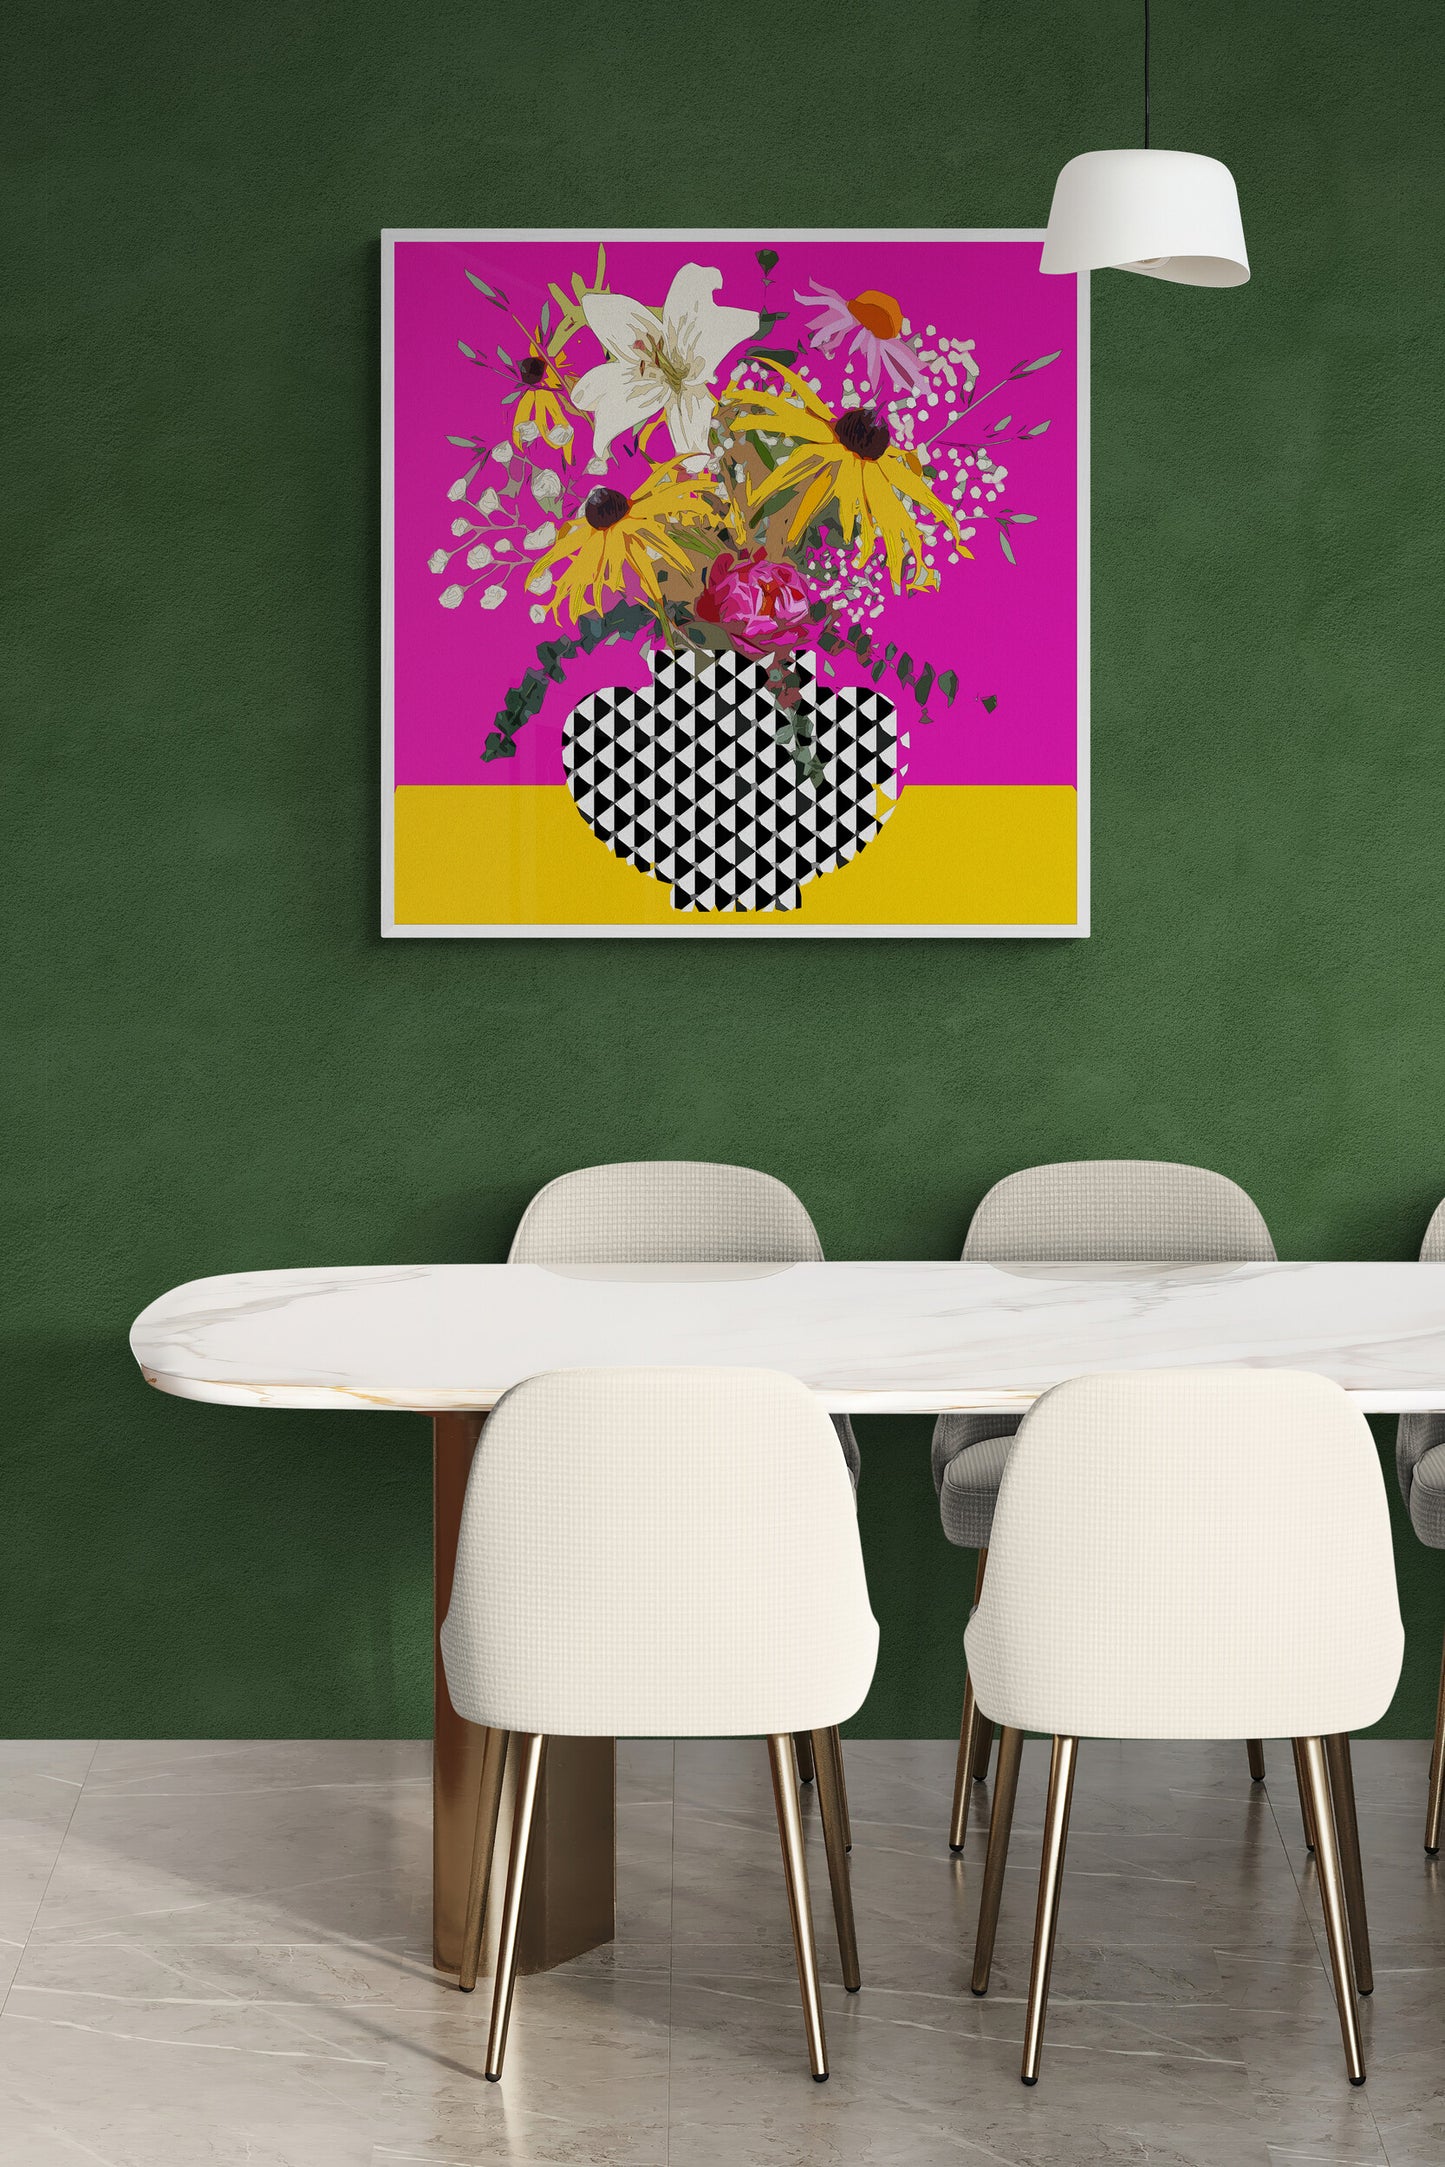 Vibrant Floral Wall Art Print on Stretched Canvas or Fine Art Paper